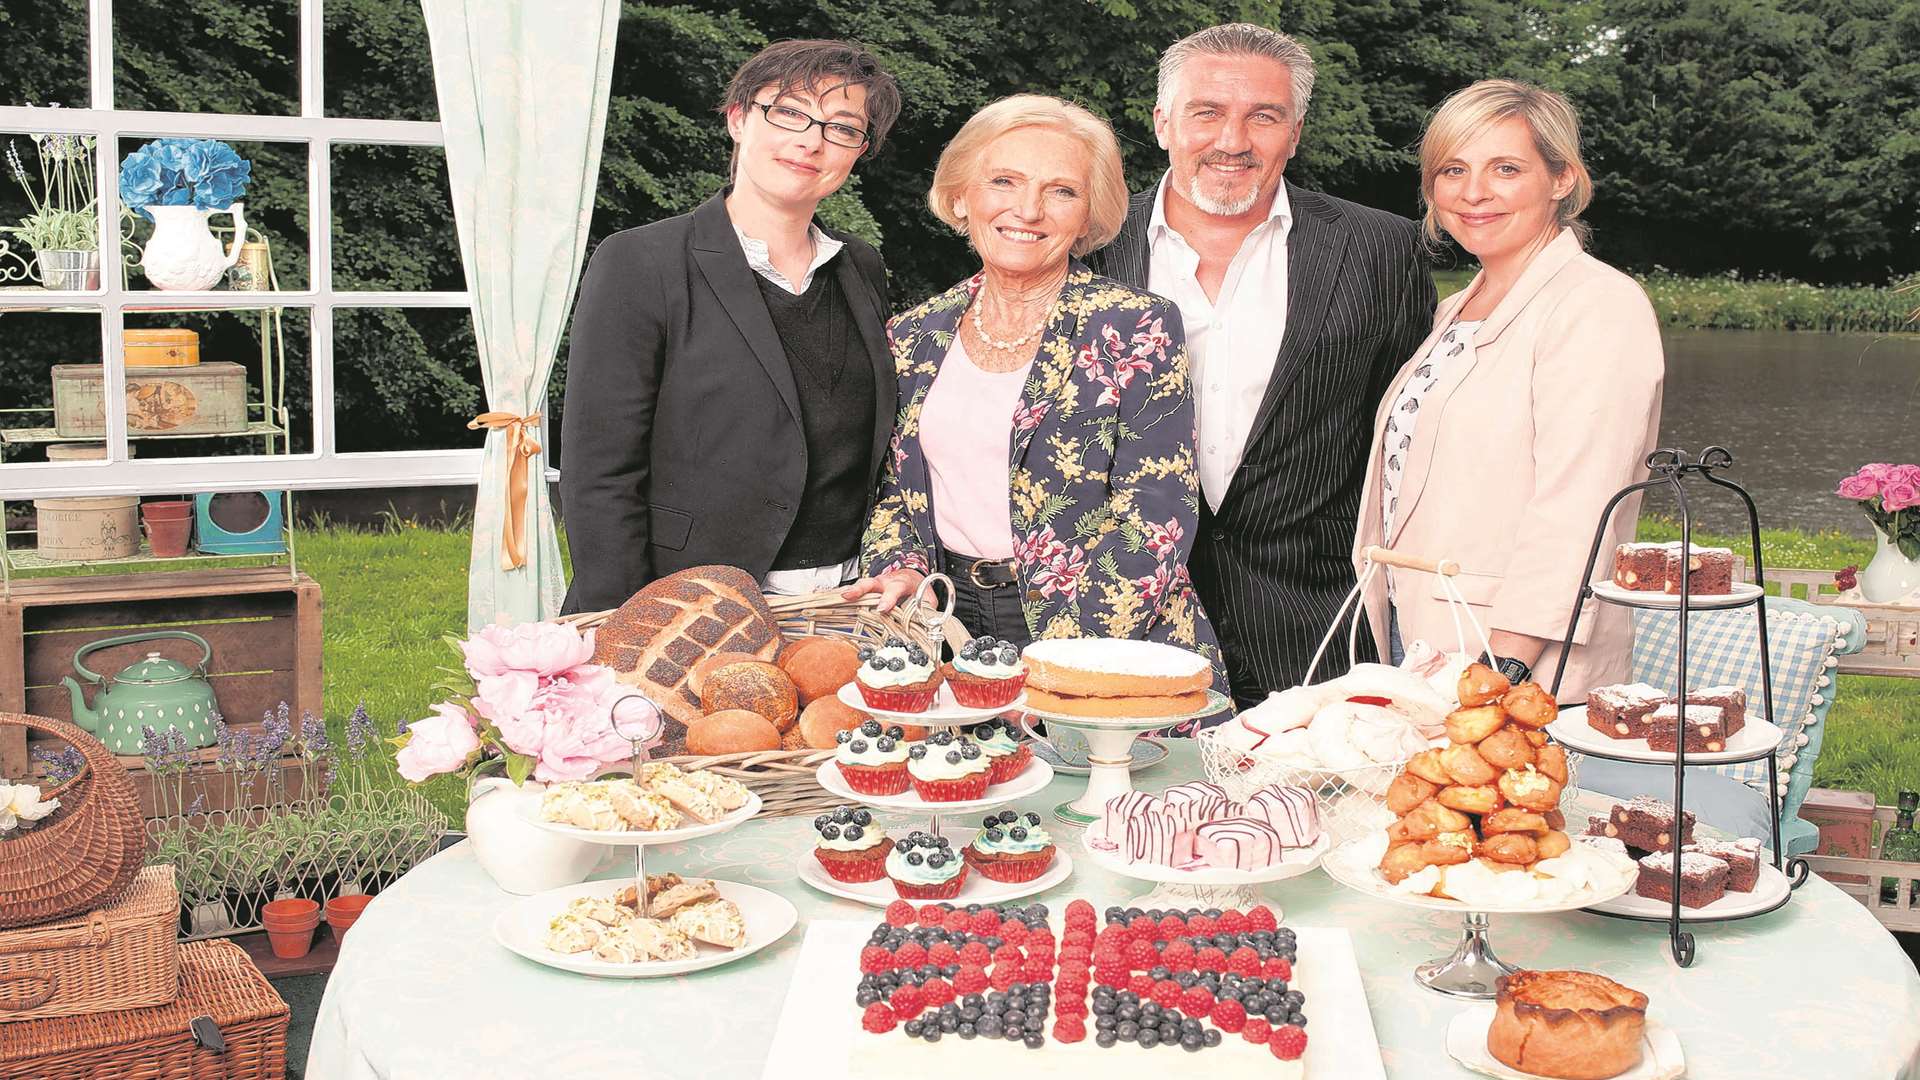 The Great British Bake Off team - Sue Perkins, Mary Berry, Paul Hollywood, Mel Giedroyc